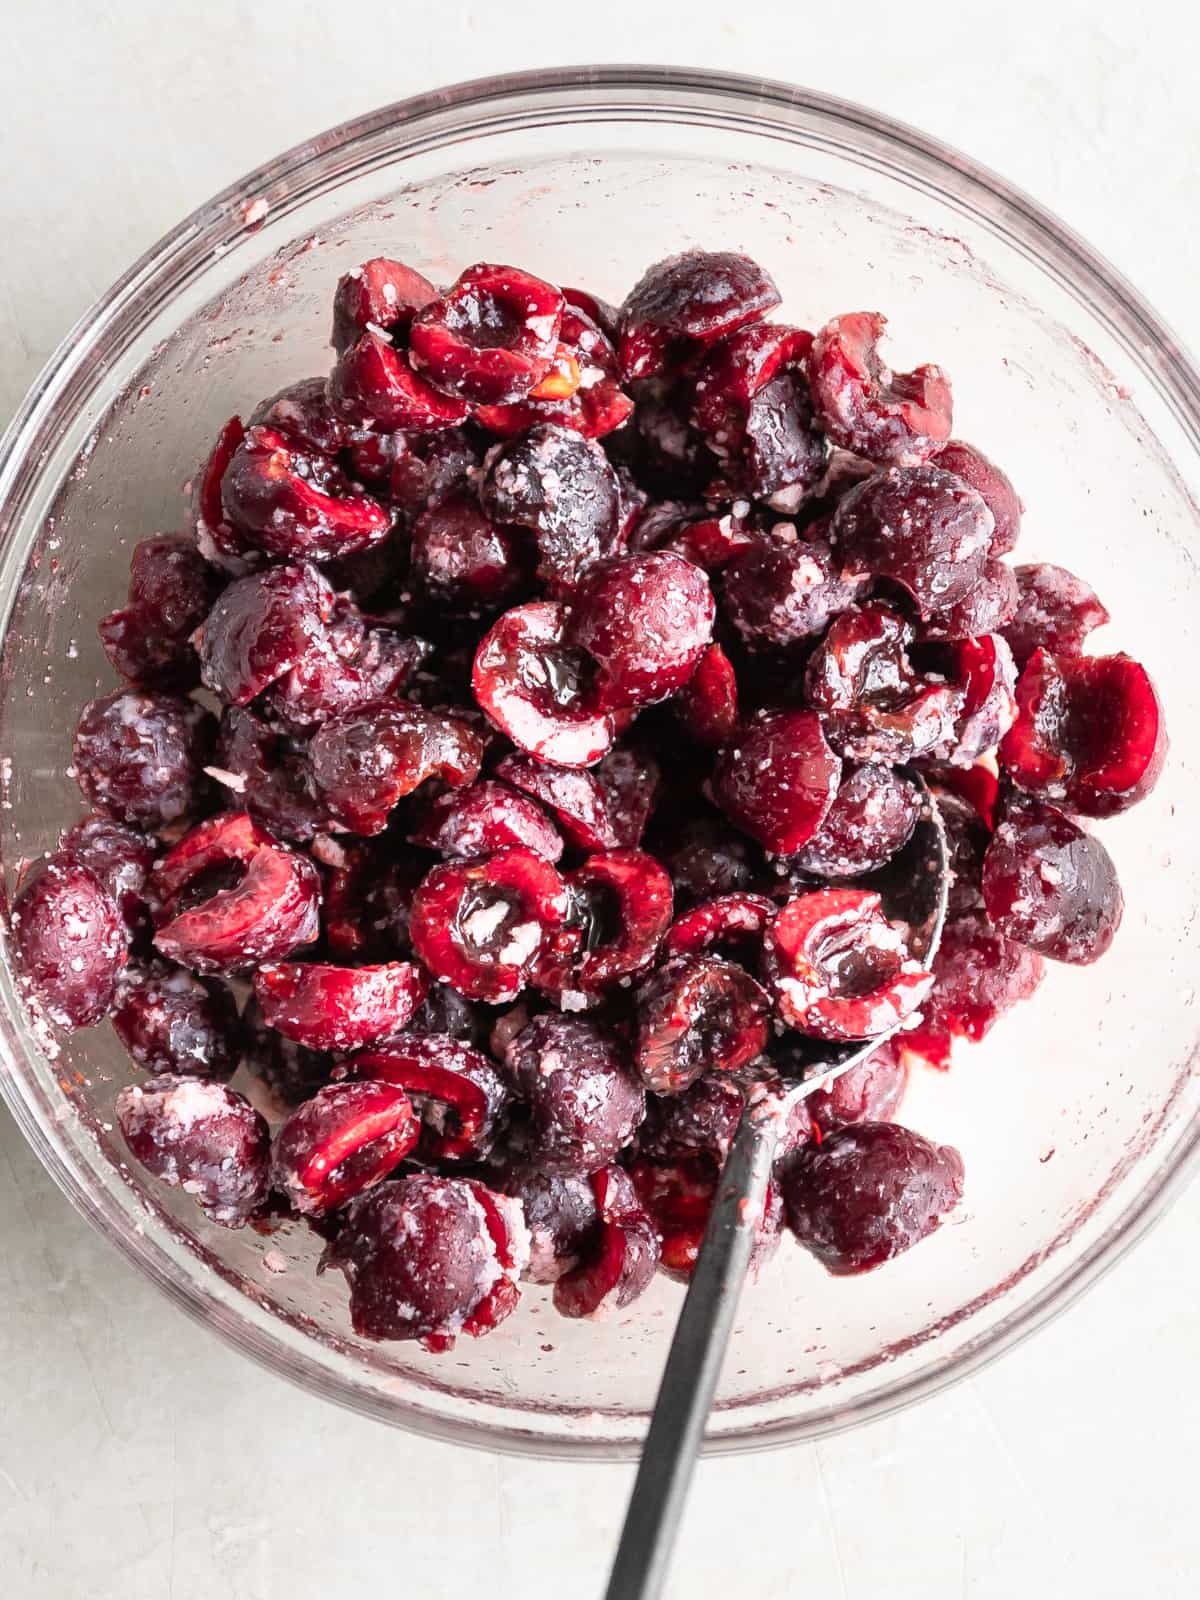 Bowl of cherries mixed with other other ingredients.